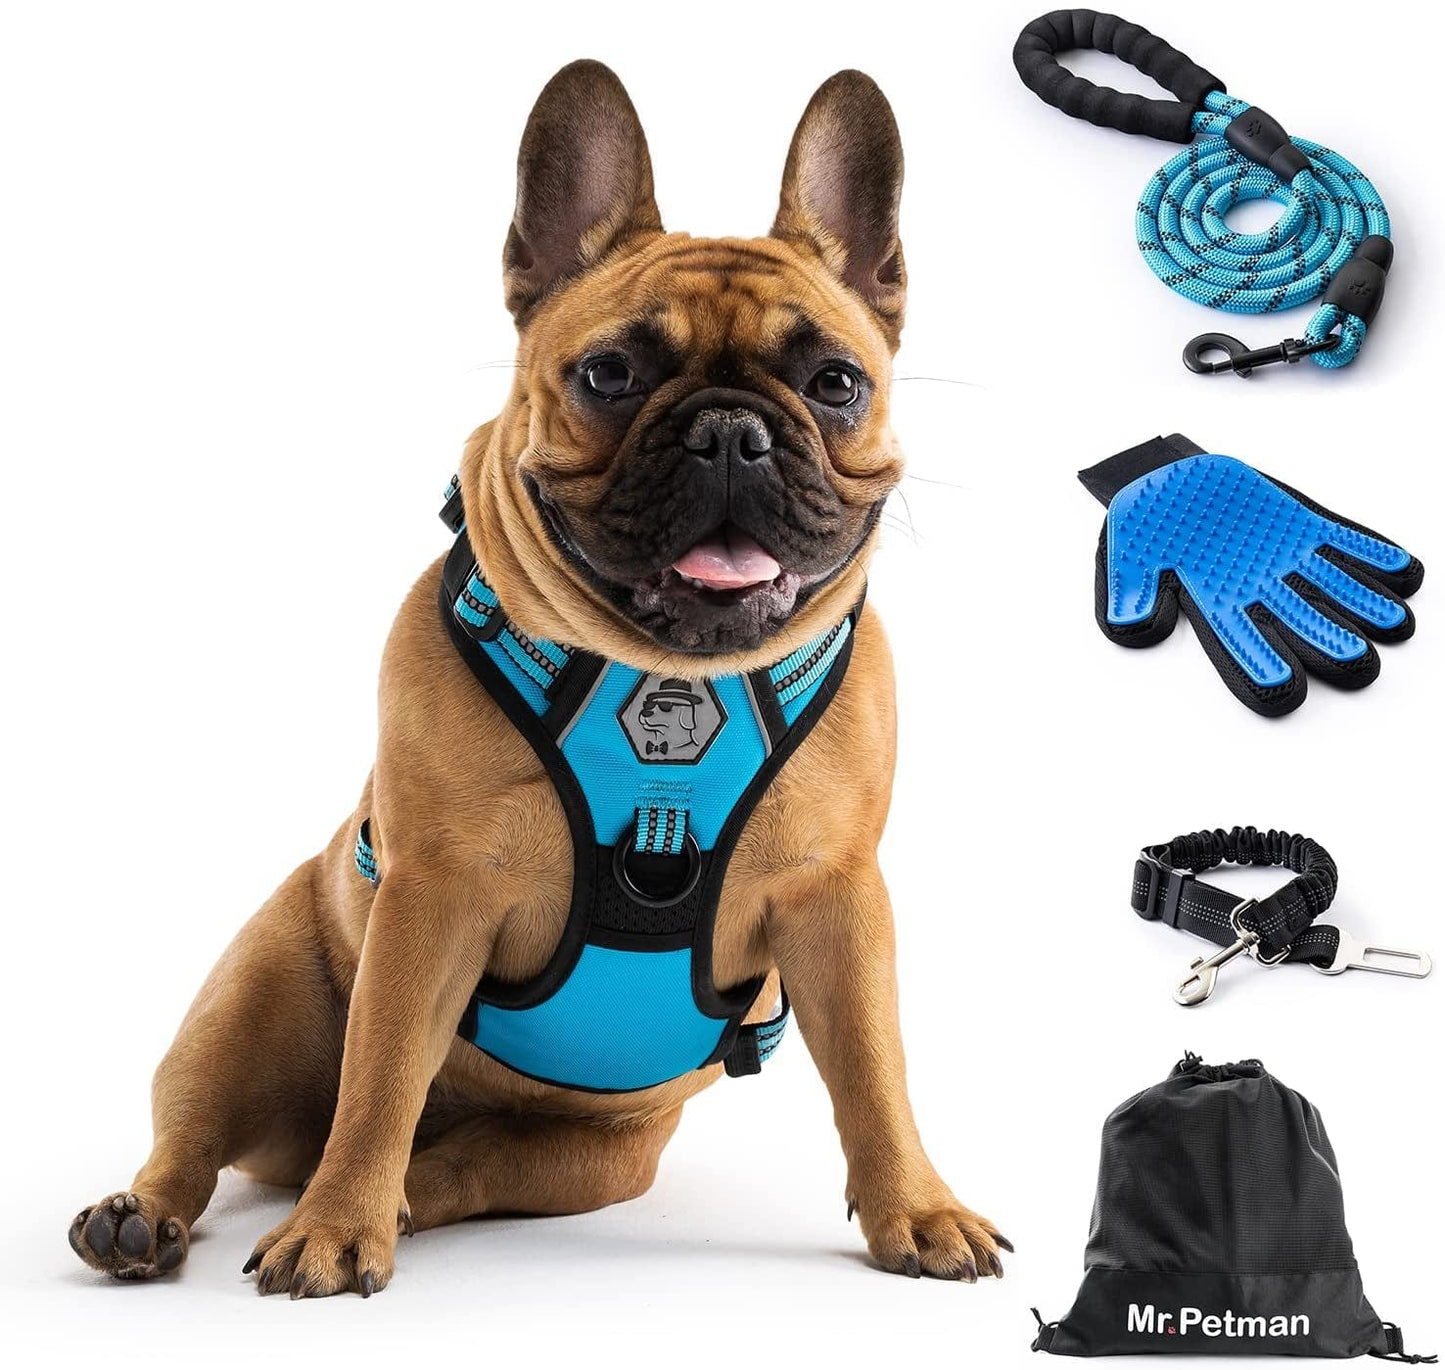 MR. PETMAN No Pull Dog Harness with Leash, Seat Belt, Grooming Glove - No Choke Dog Harness Set for Small Medium Large Dogs- Reflective Adjustable Dog Vest Harnesses with Handle for Walking Training Animals & Pet Supplies > Pet Supplies > Dog Supplies > Dog Apparel Mr. Petman Sky Blue Small 